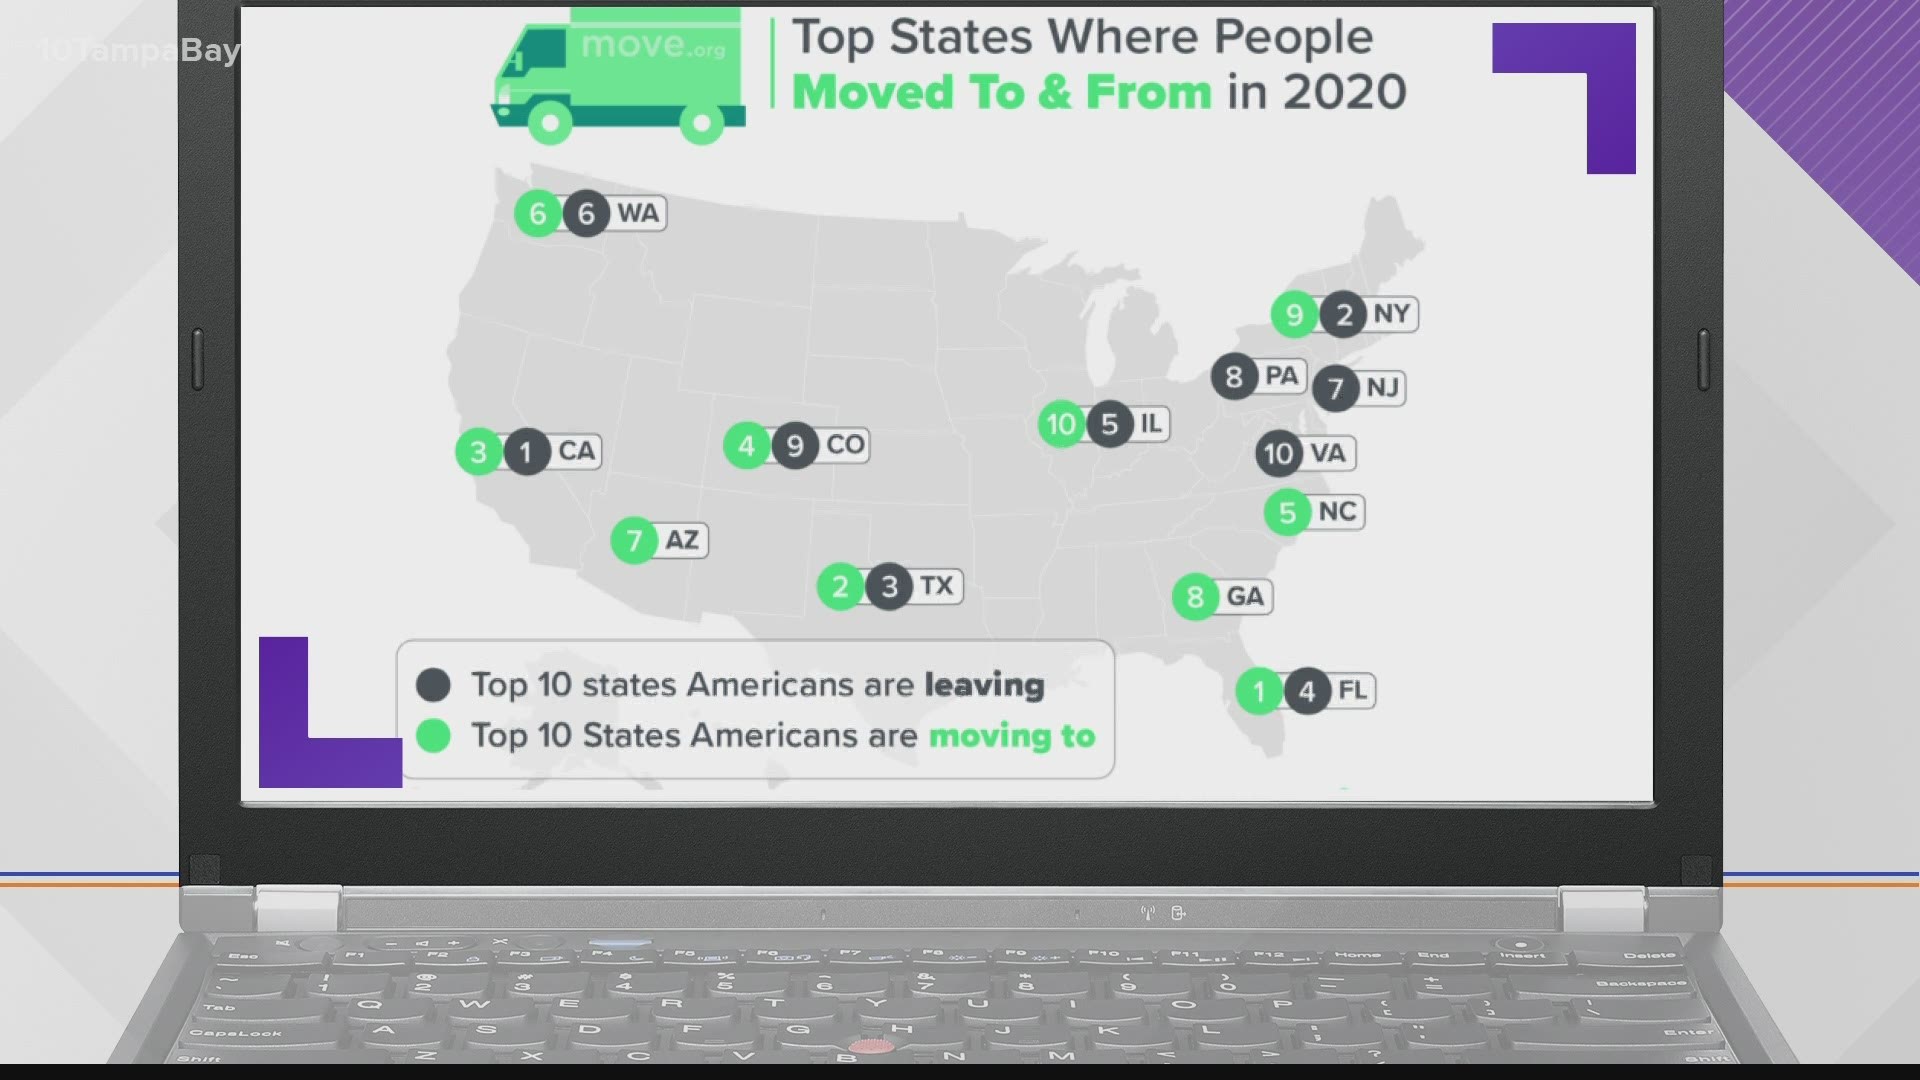 The Sunshine State beat out Texas, California, and Colorado as the top state with the newest residents.